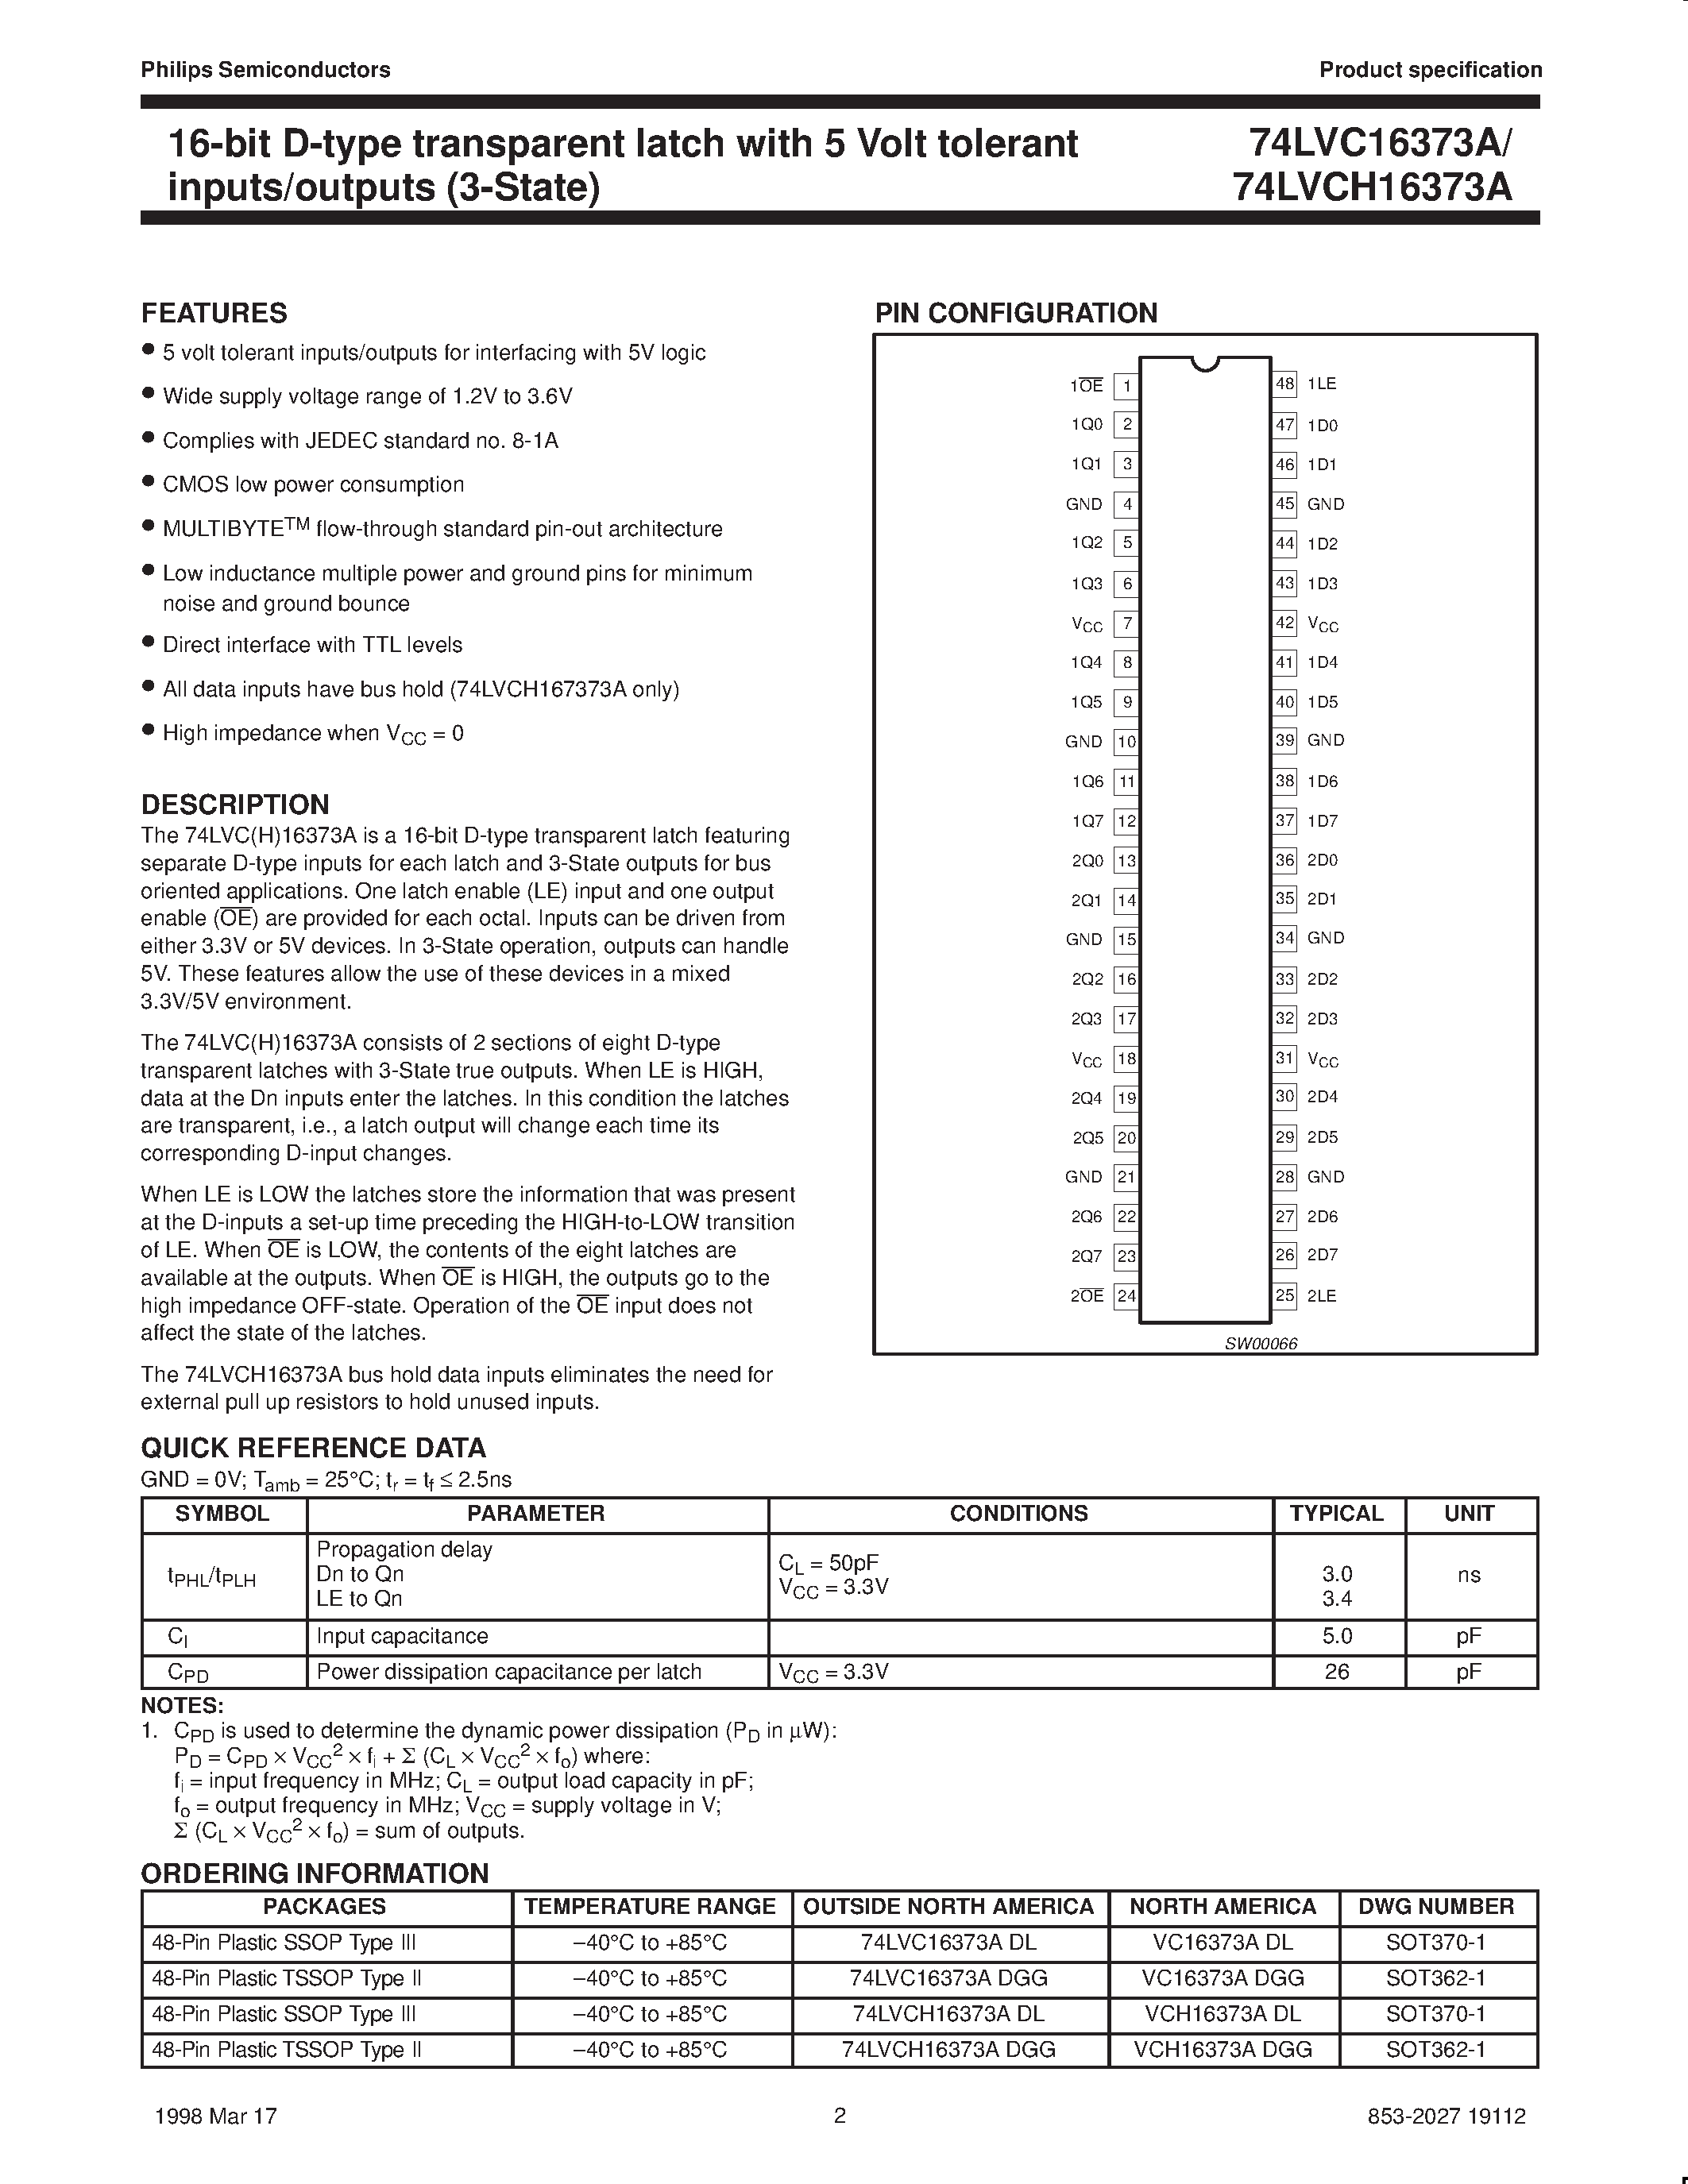 Datasheet VC16373ADGG - 16-bit D-type transparent latch with 5 Volt tolerant inputs/outputs 3-State page 2